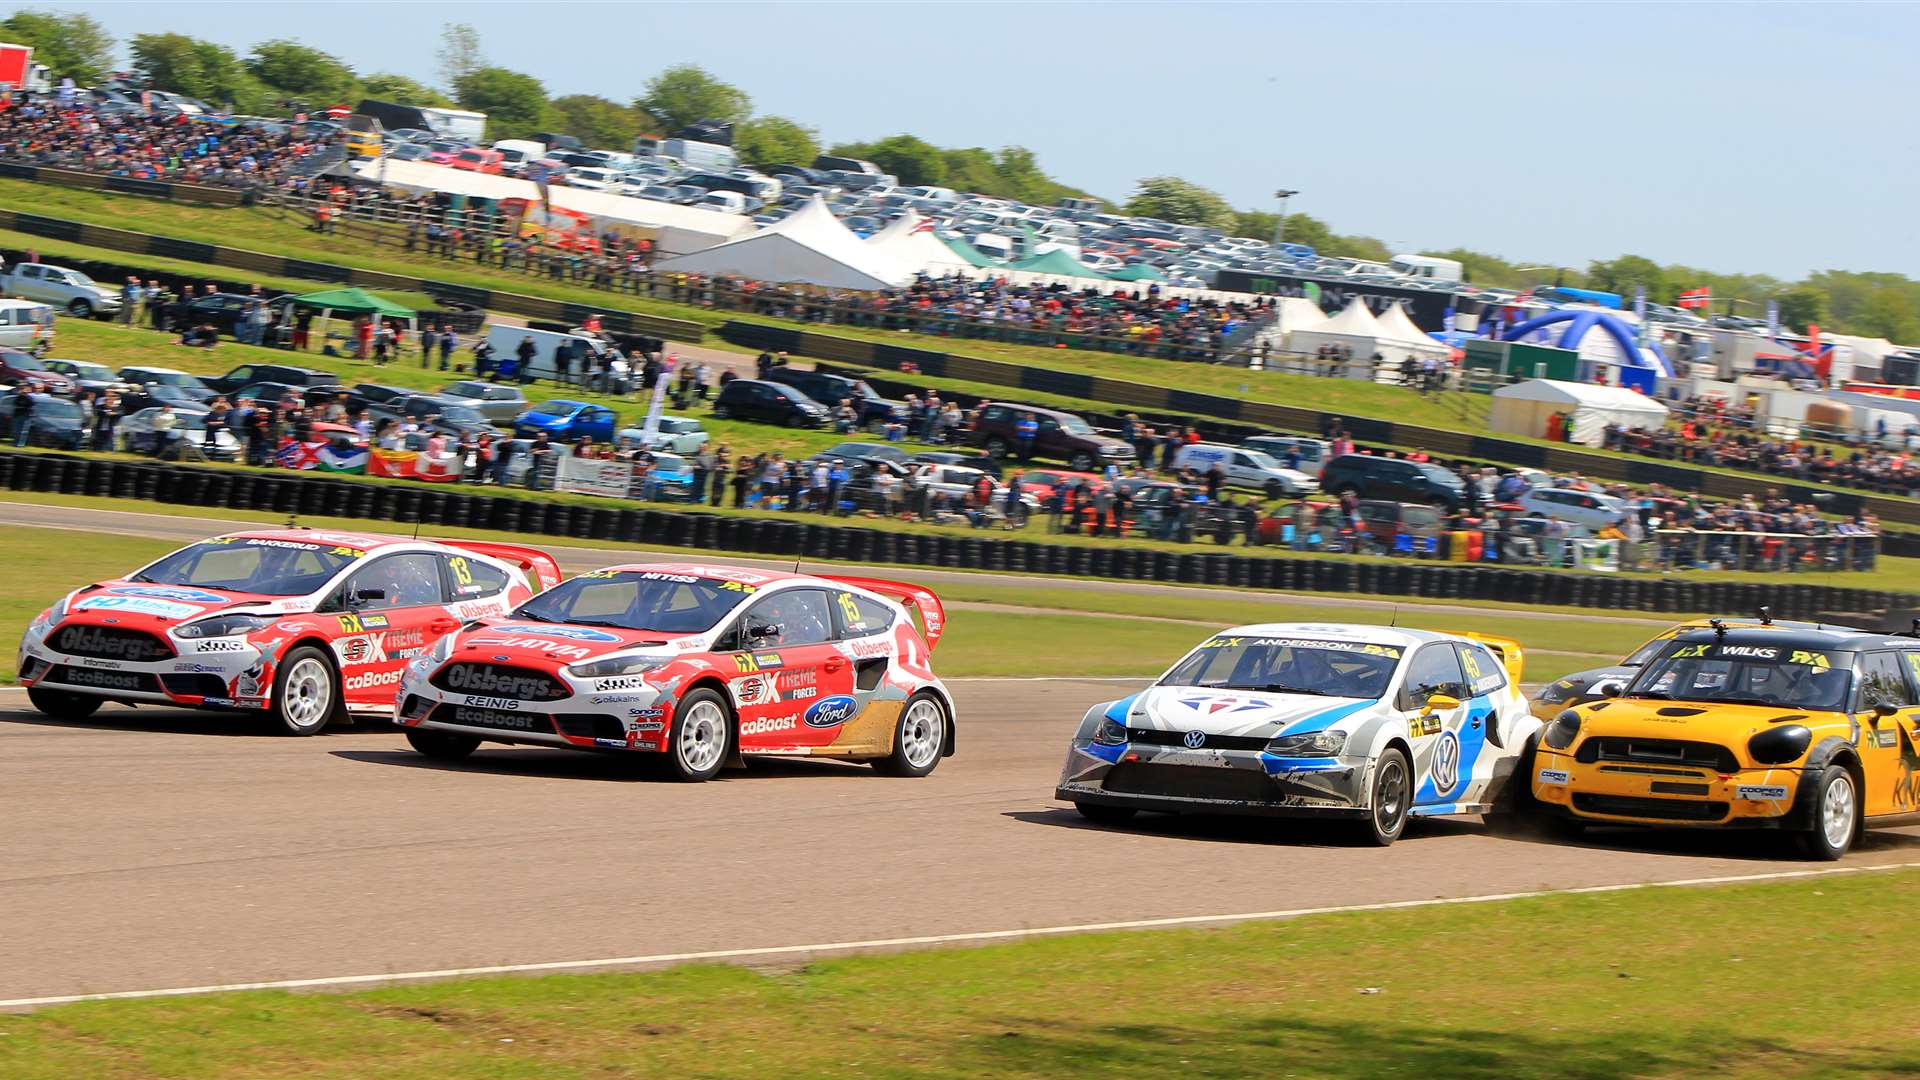 A packed crowd enjoyed day two at Lydden. Picture: Joe Wright